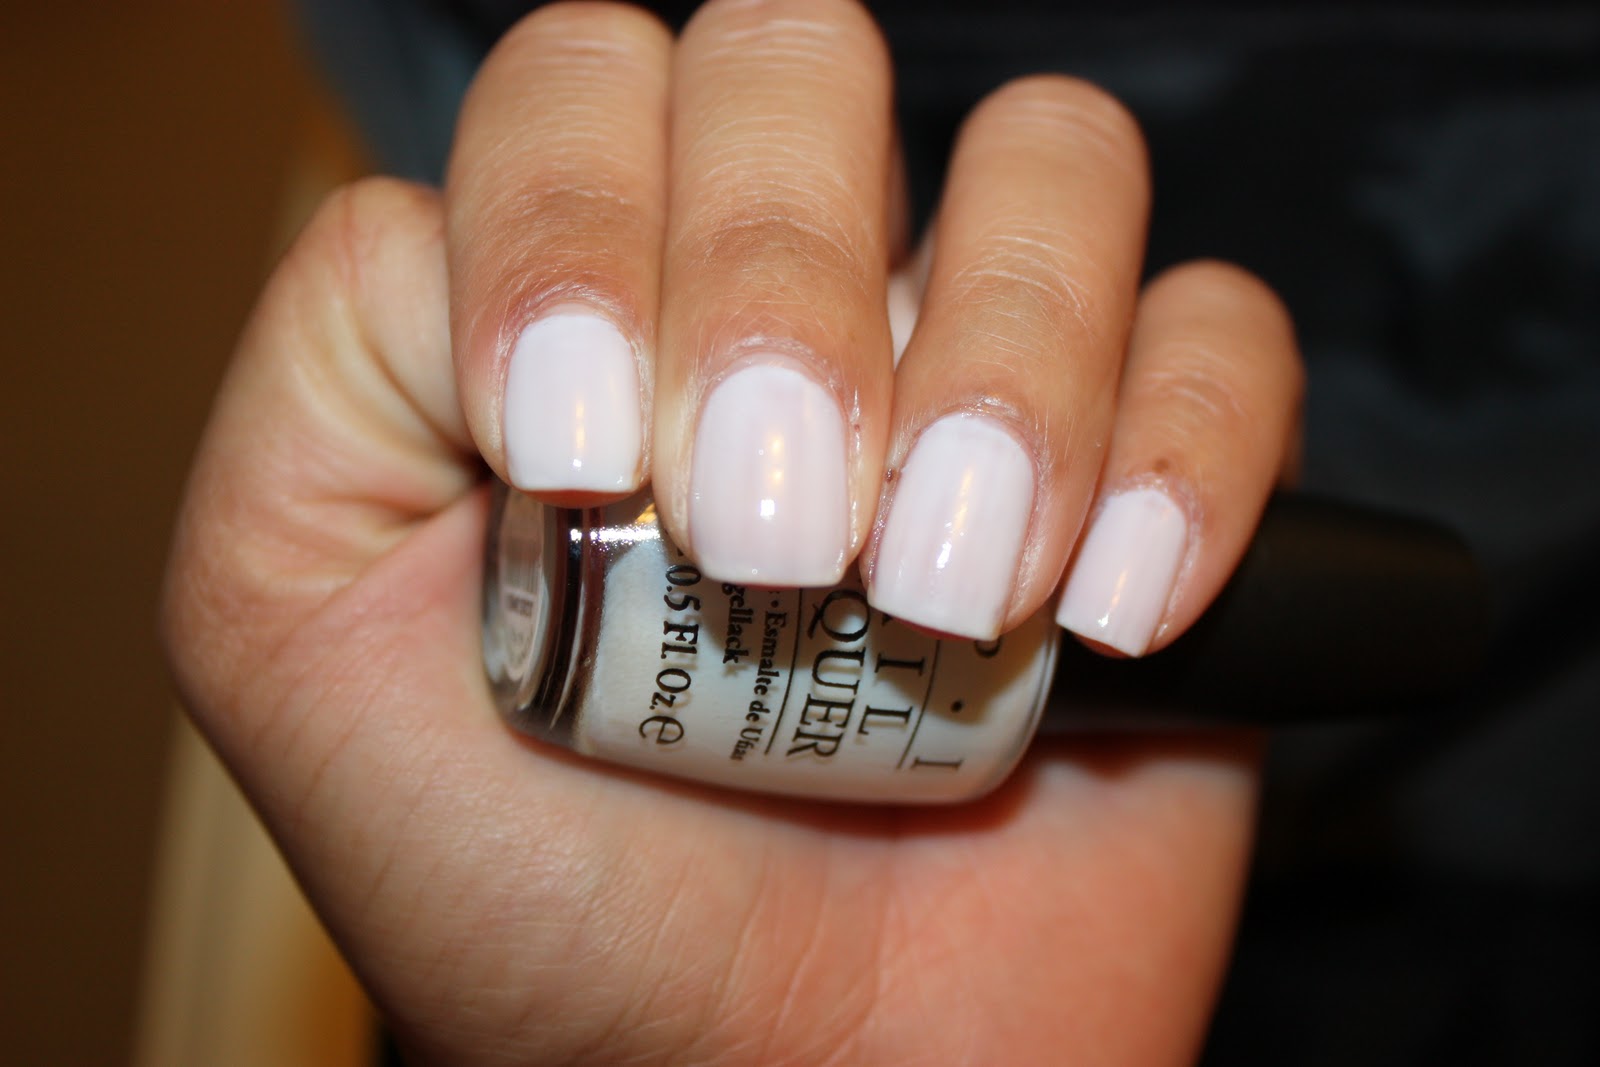 6. OPI "Funny Bunny" - wide 1